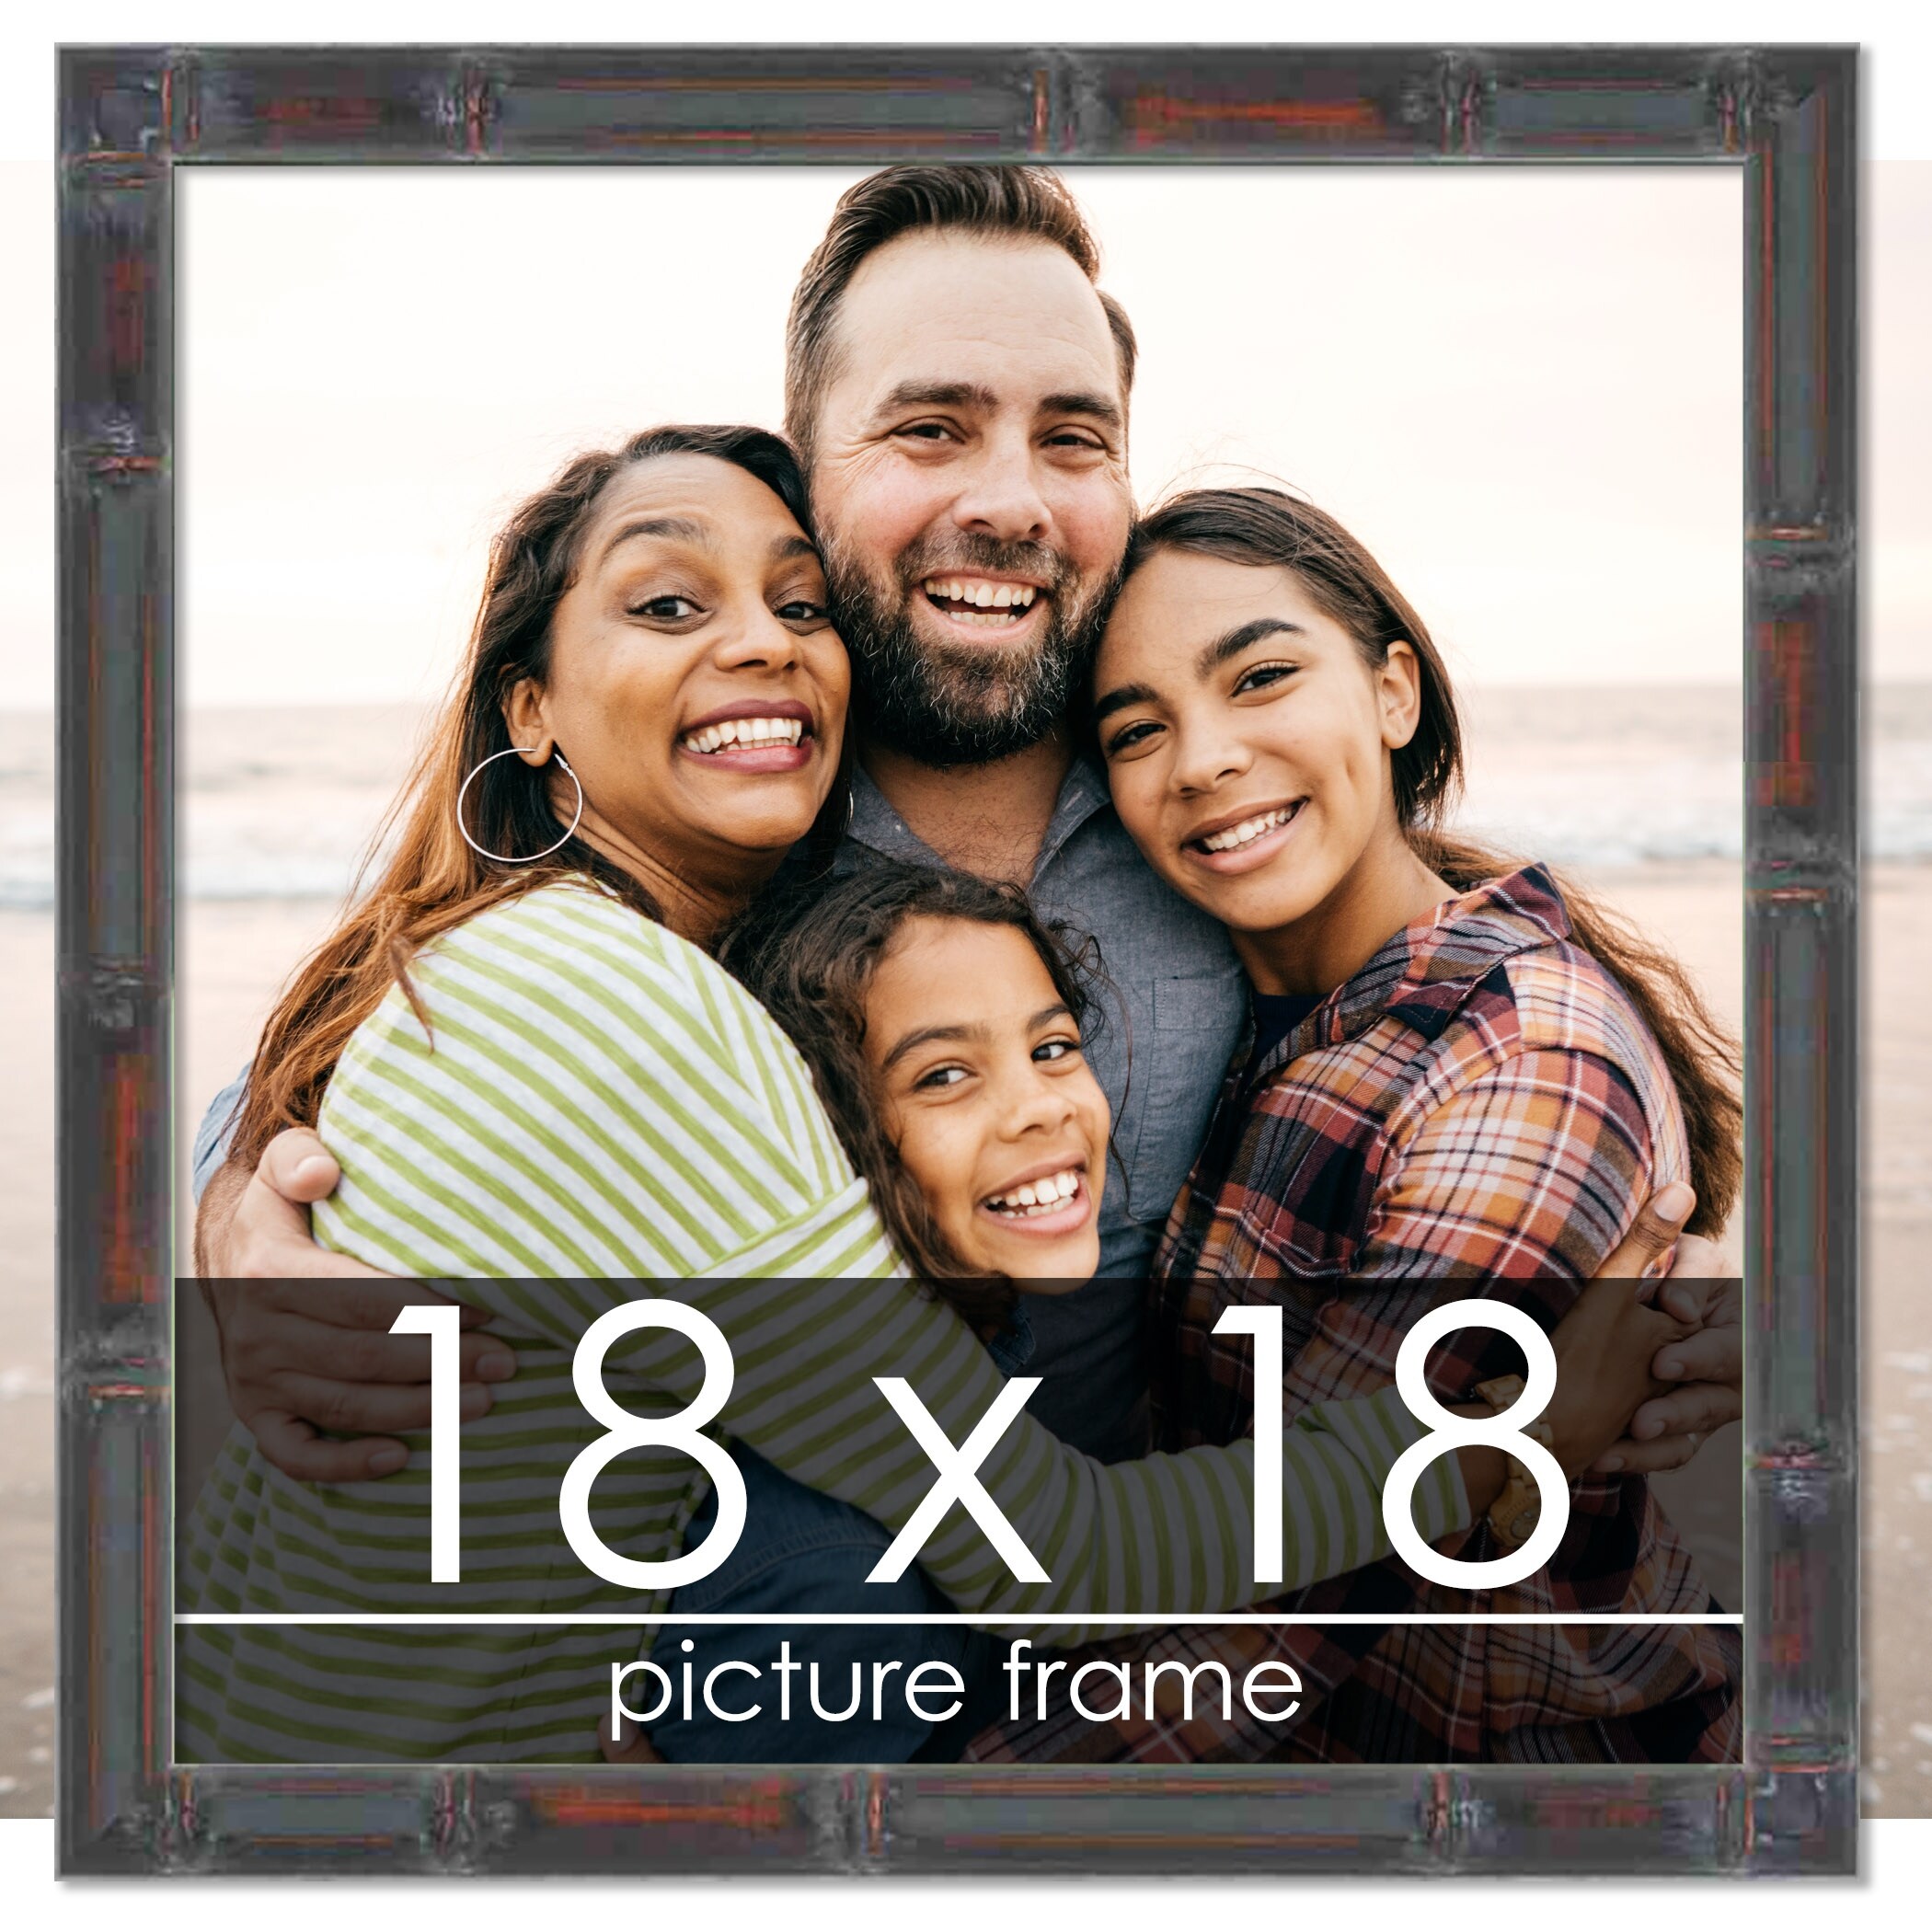 Poster Palooza 18x18 Frame Black Solid Wood Picture Square Frame Includes  UV Acrylic, Foam Board Backing & Hanging Hardware